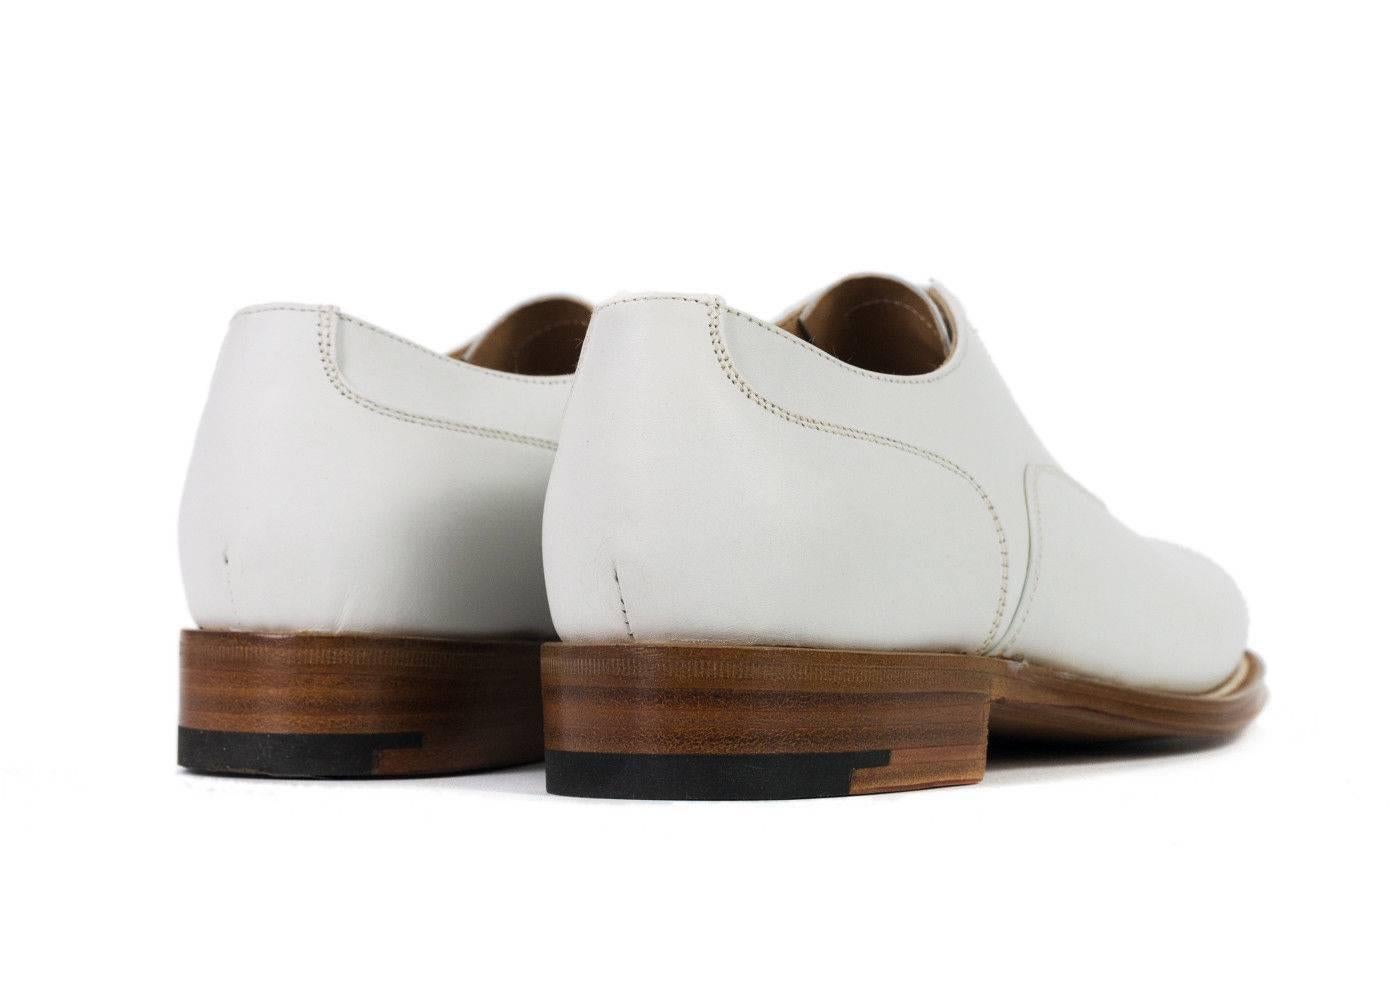 Churchs Bella Oxfords in a gorgeous clean white leather. These derby shoes are perfect for professional occasions or worn as a trendy casual look. Pair it with a pair of culottes or black jeans with a striped button down or feminine blouse for a